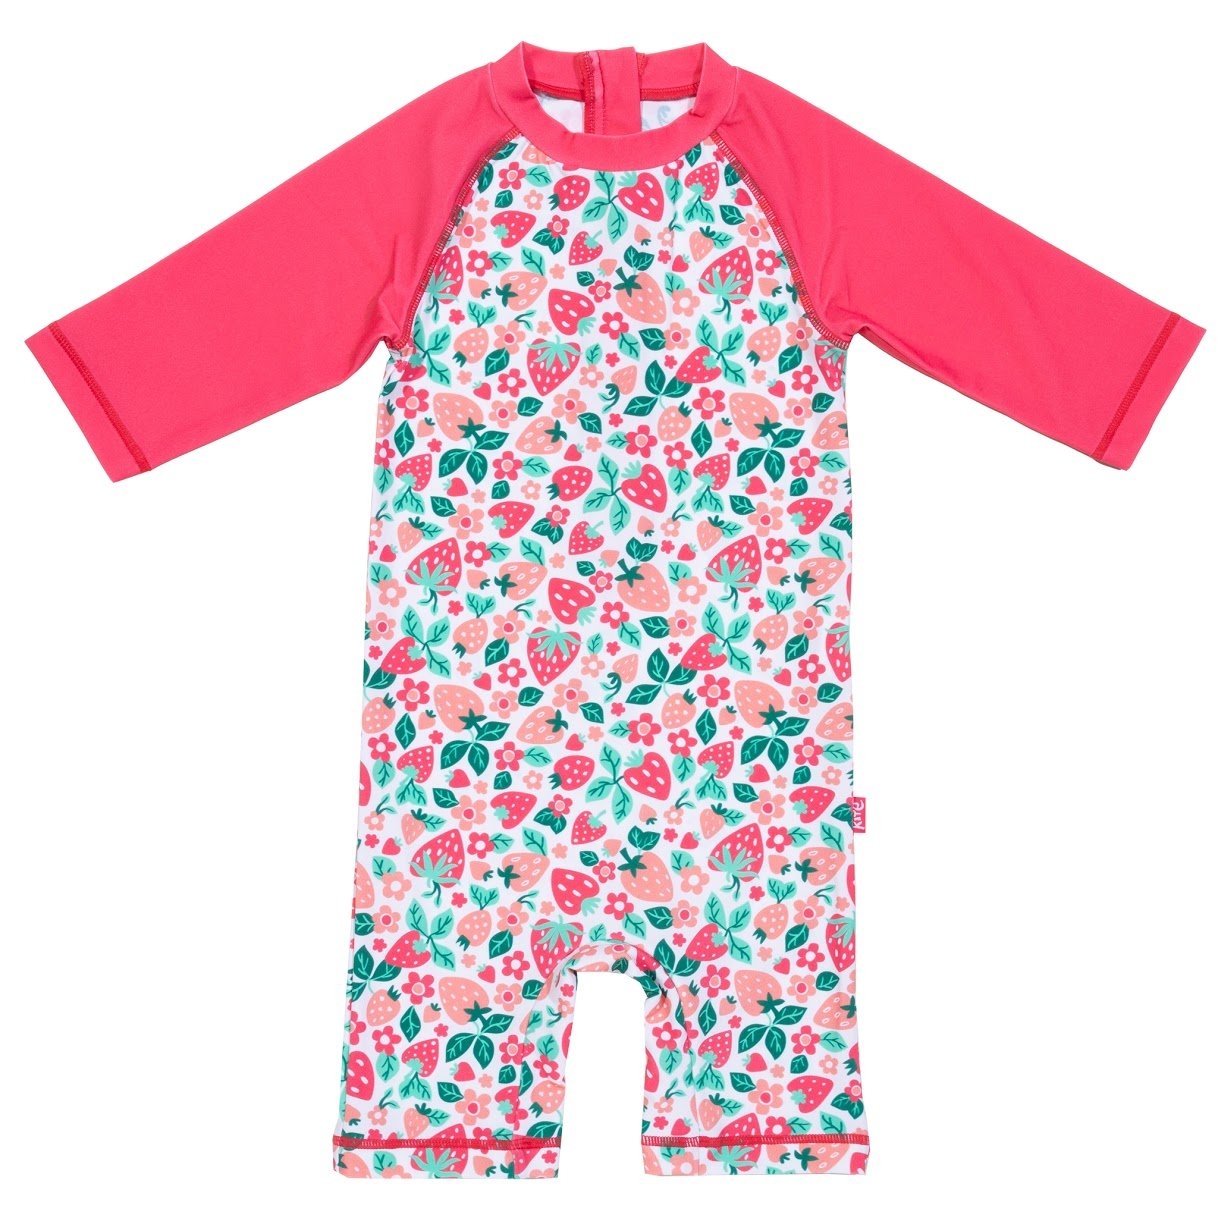 Kite Toddler Very Berry UPF50+ Sunsuit Swimsuit – Pink – 12-18 months